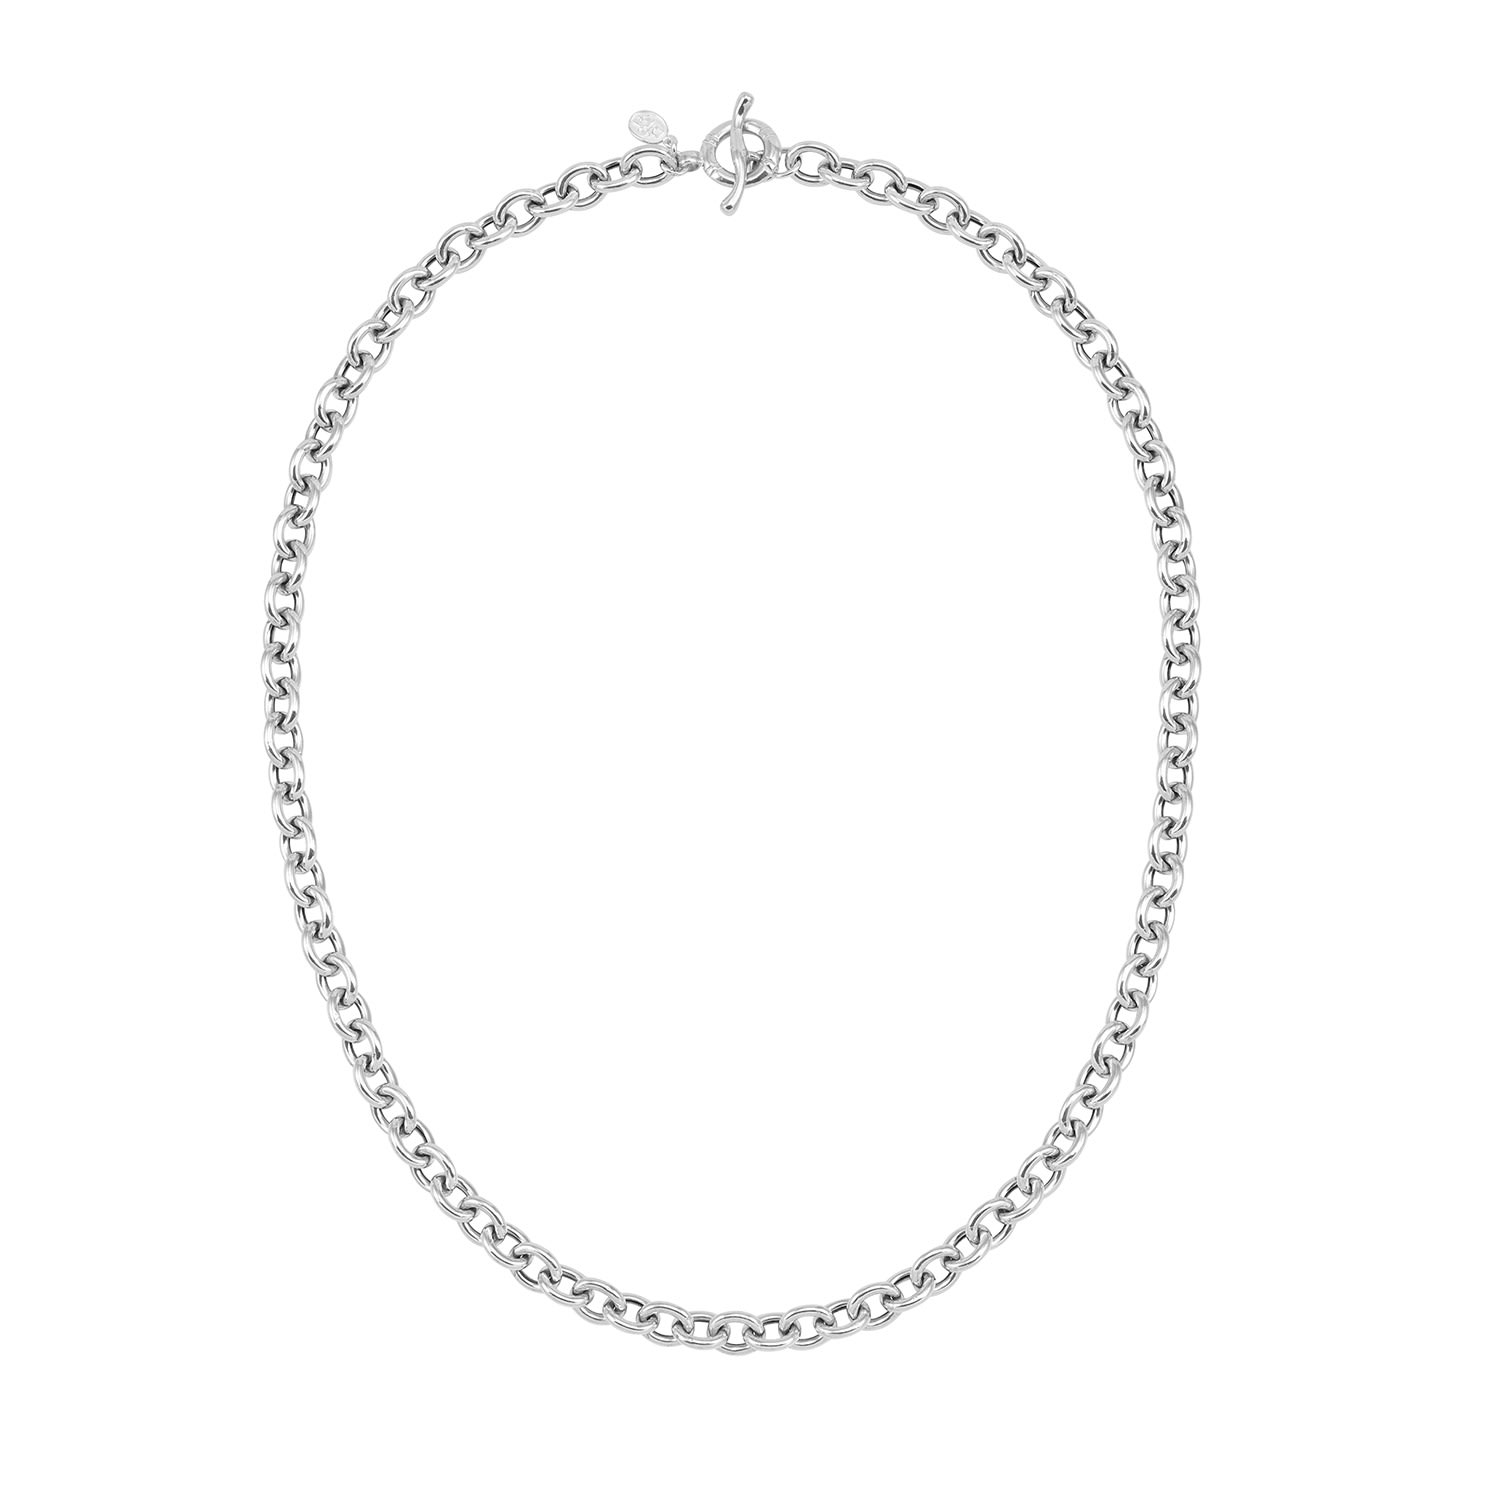 Silver Men's Oval Link Necklace Chain Dower & Hall